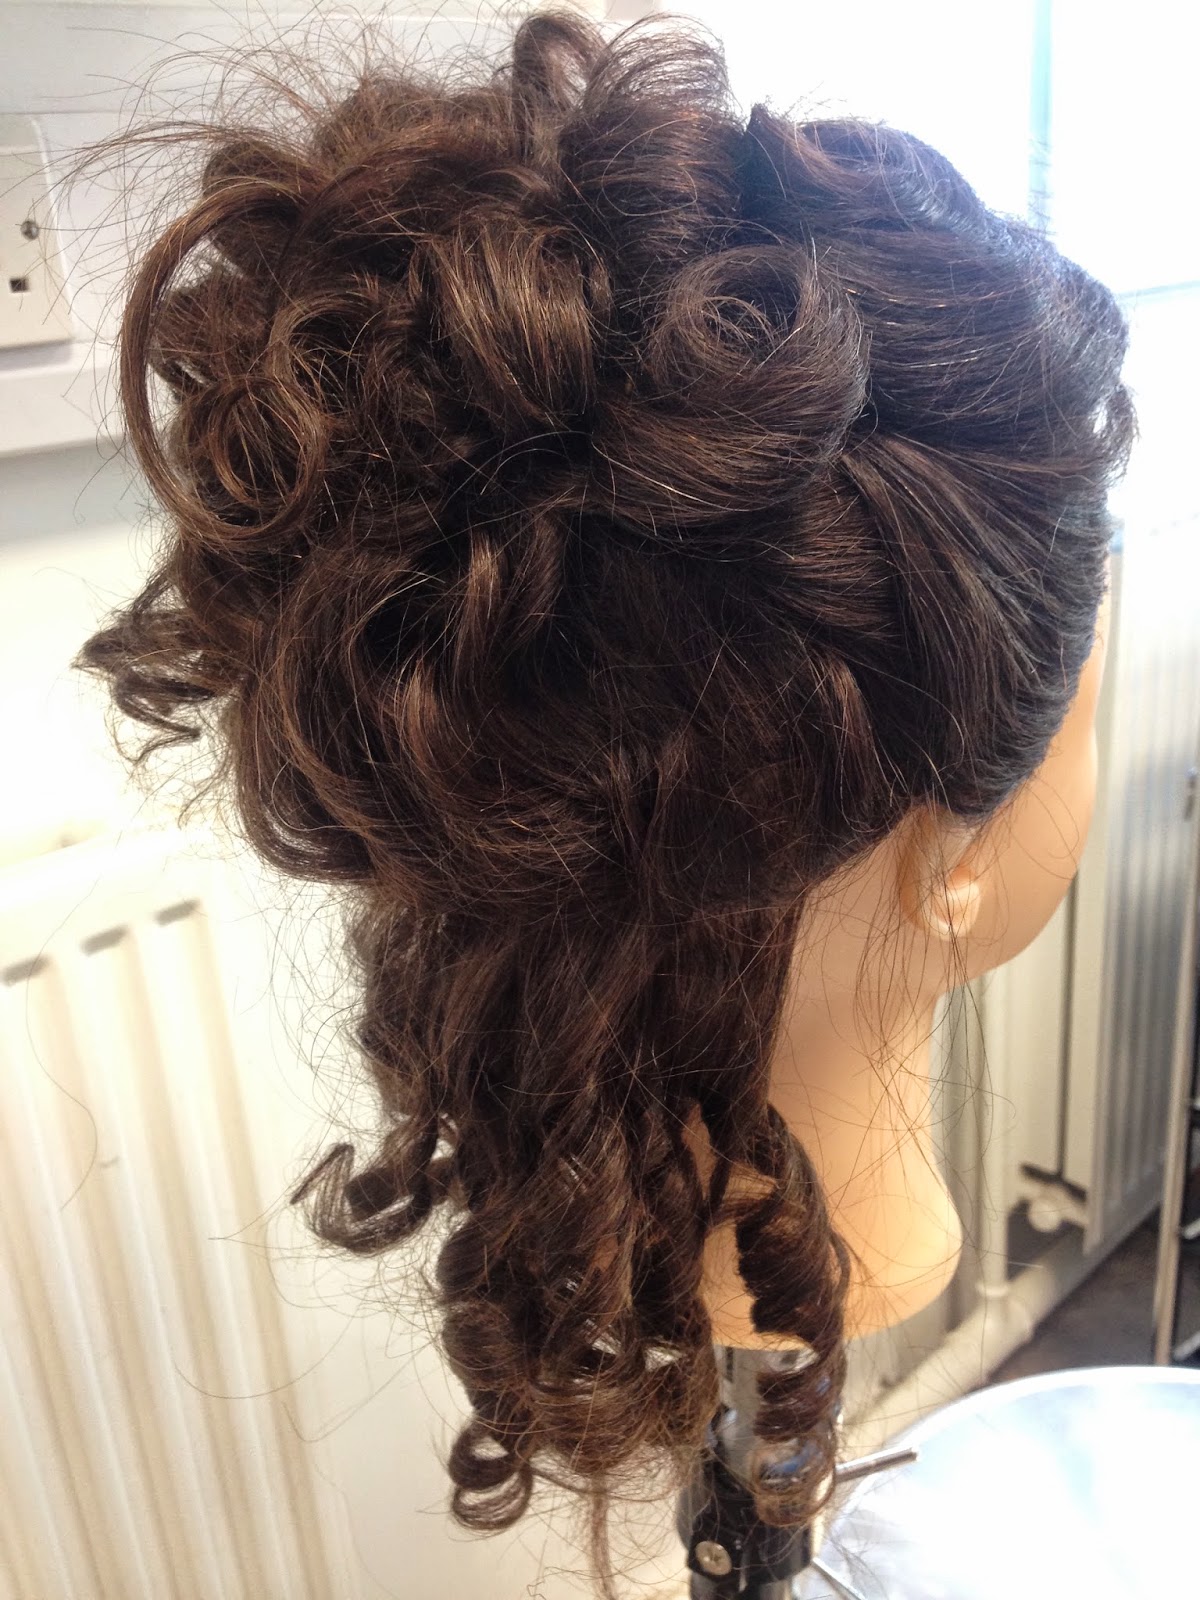 Formal victorian hairstyles